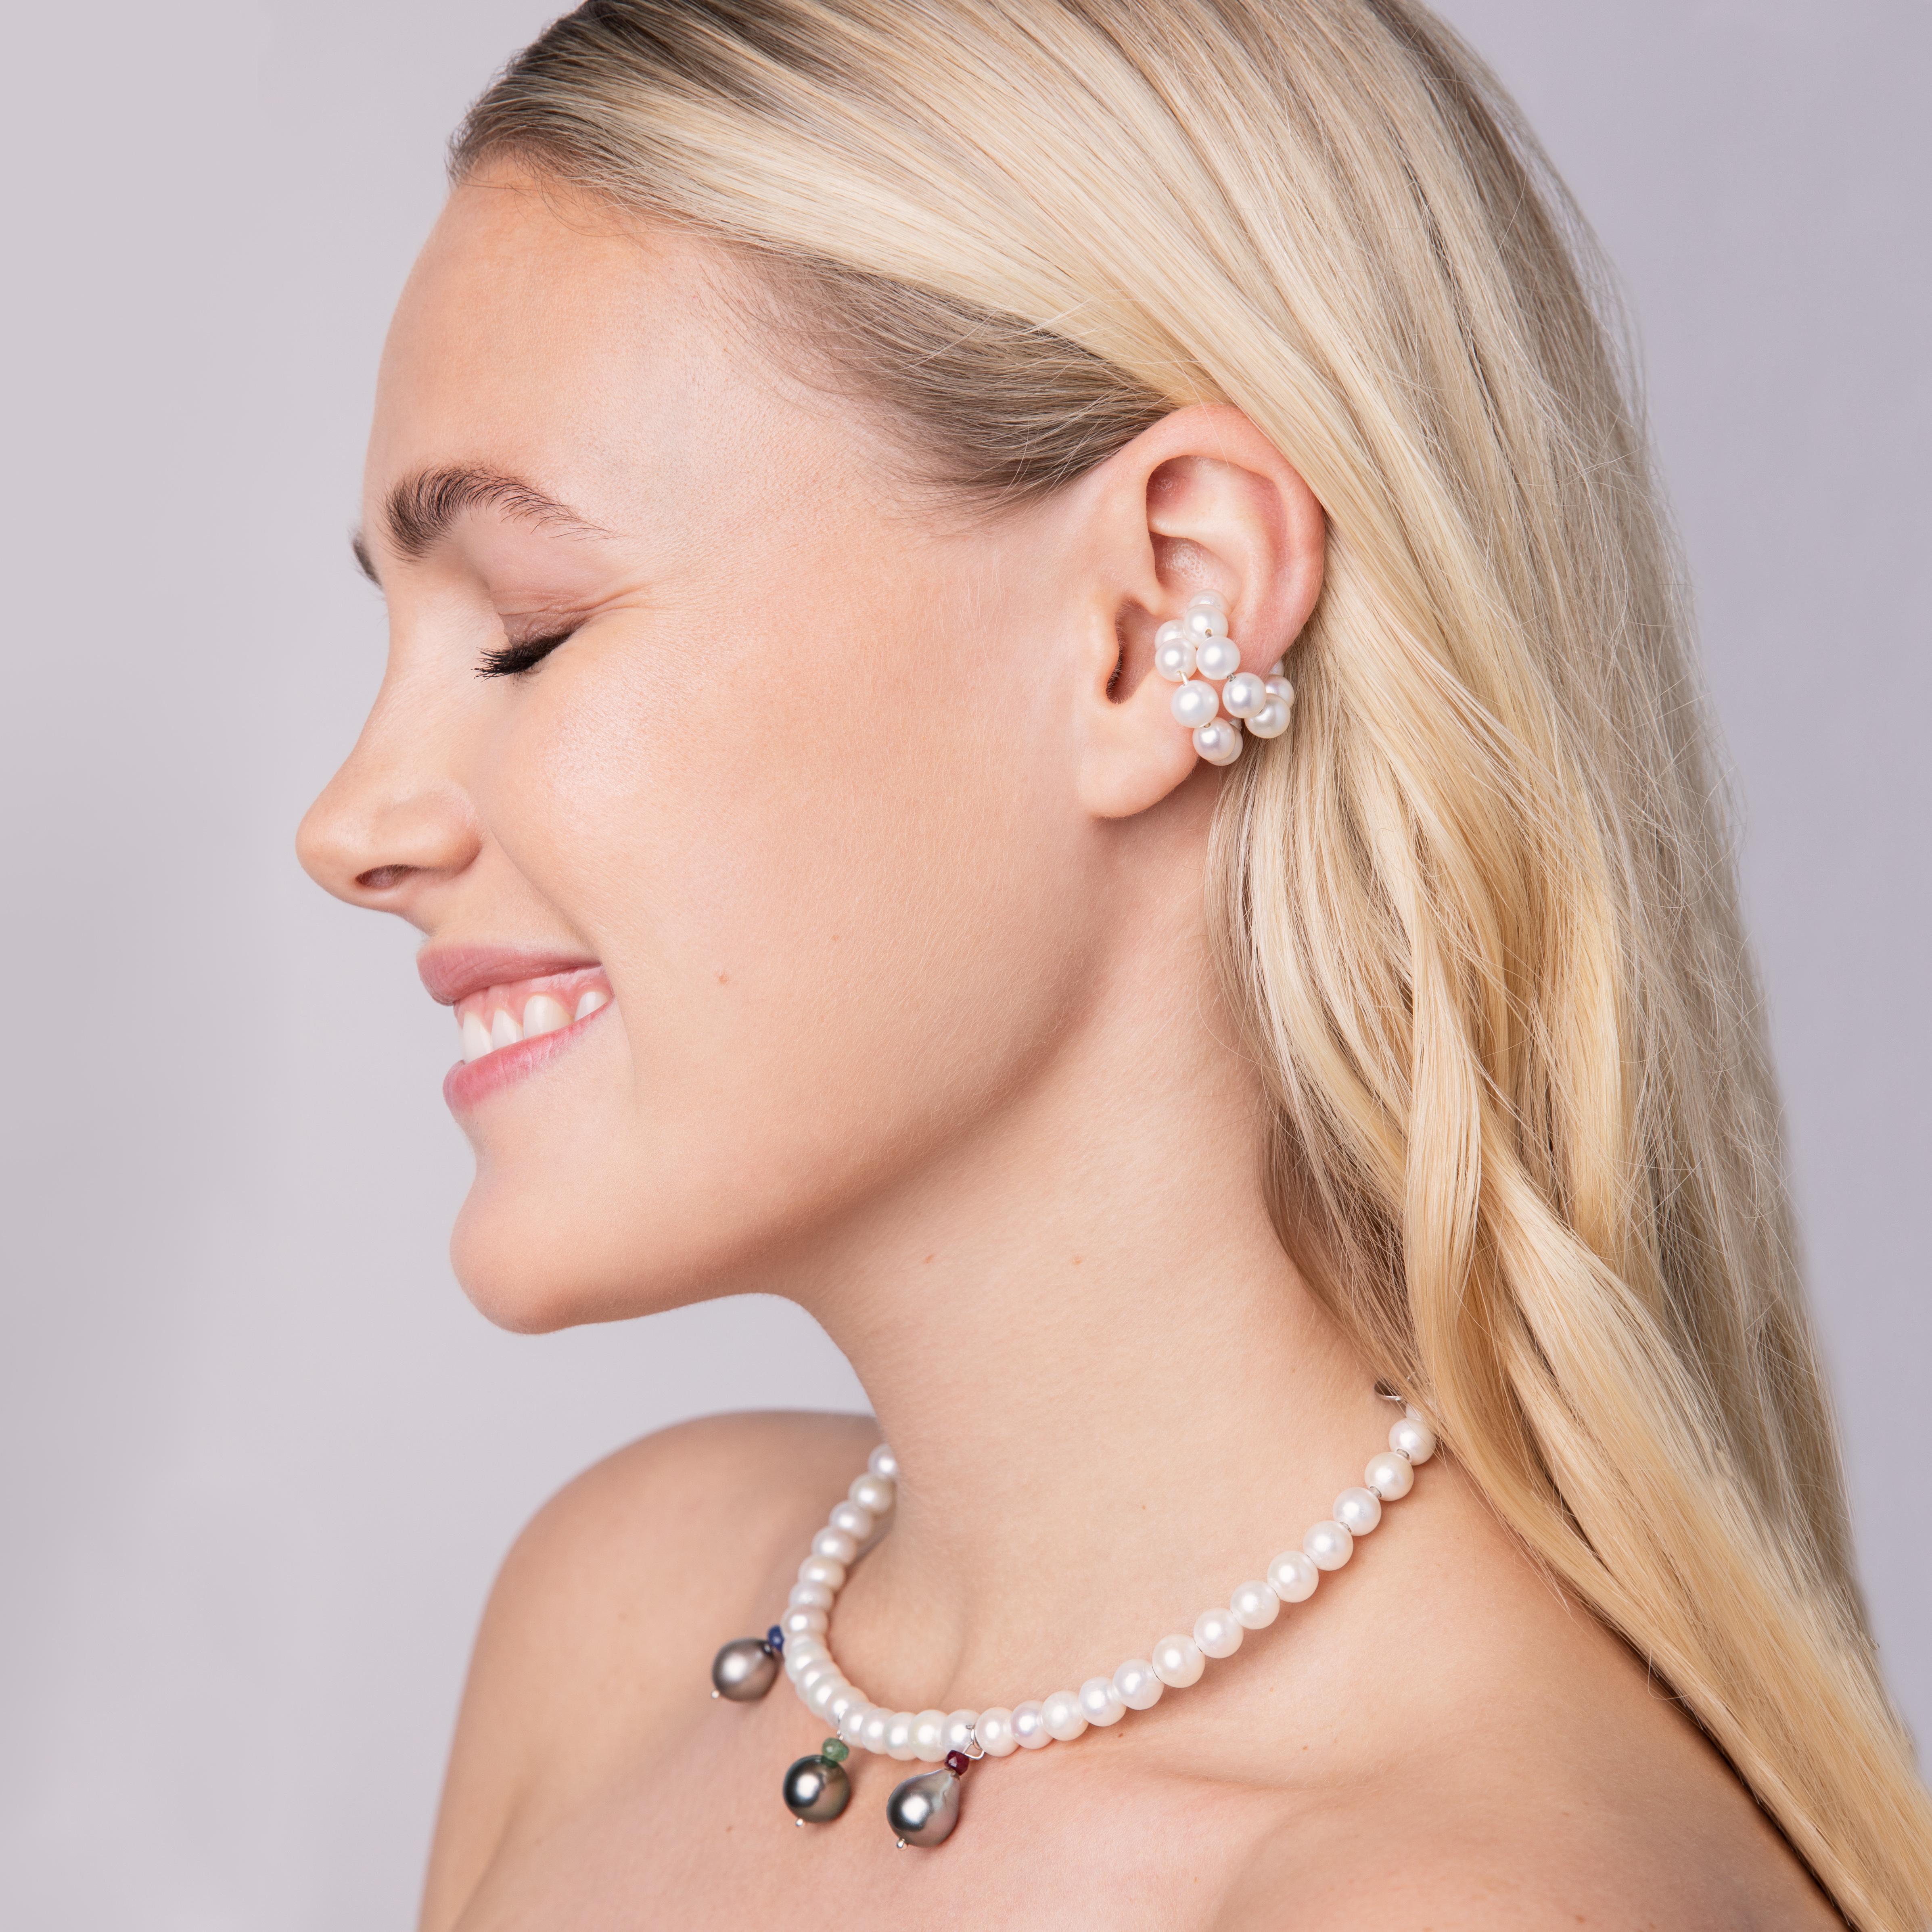 This Huggie is made of 5 mm white freshwater pearls. It is fashionable, stylish and also in clean design. 
Its shape is inspired by a classic piercing. You can easily bend the ear cuff open at the ends and put it on very easily. It upgrades any